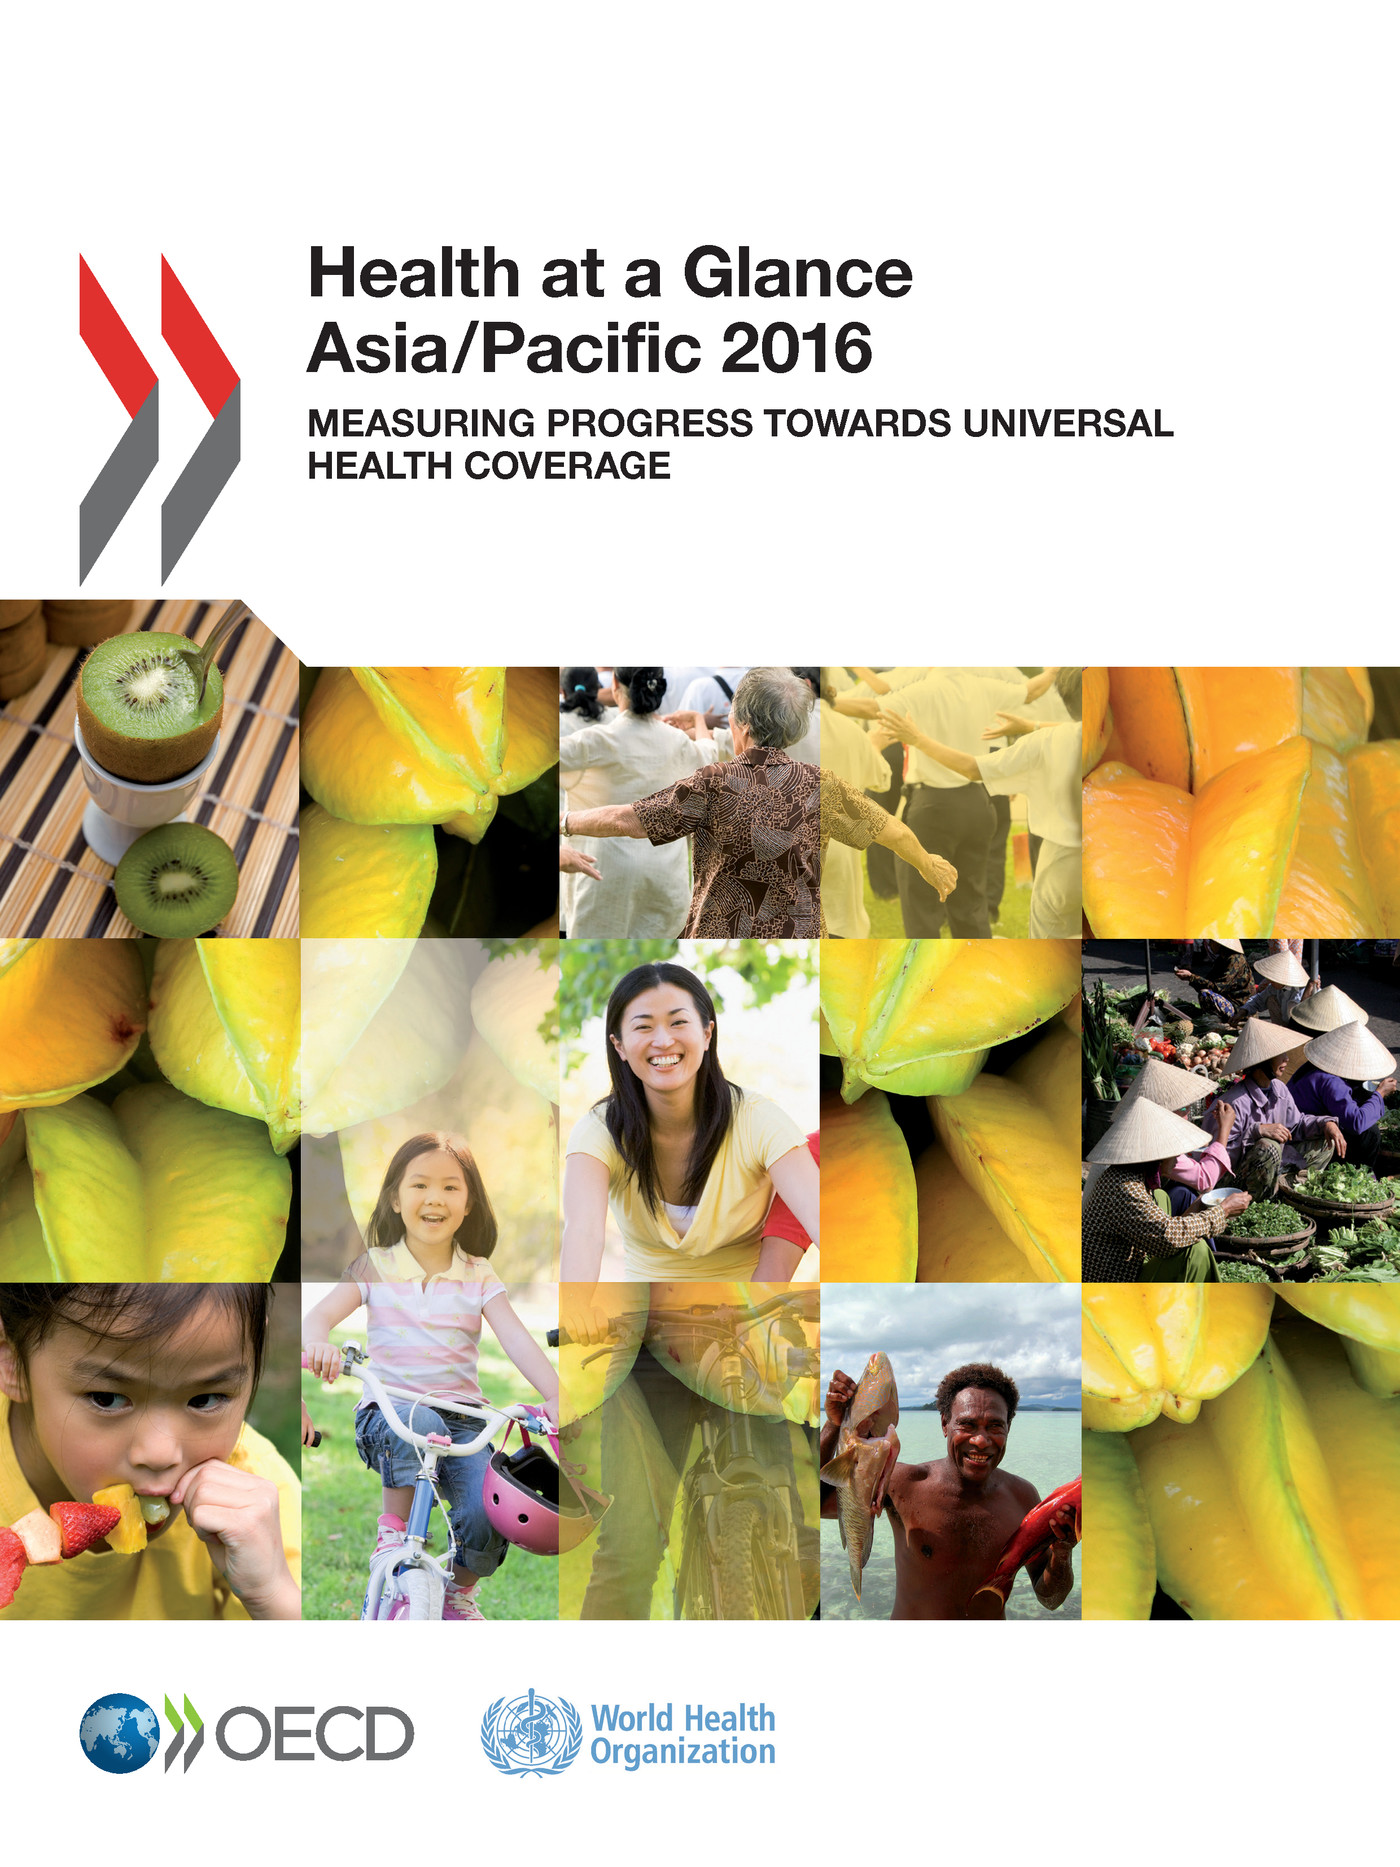 Health at a Glance: Asia/Pacific 2016 -  Collectif - OCDE / OECD